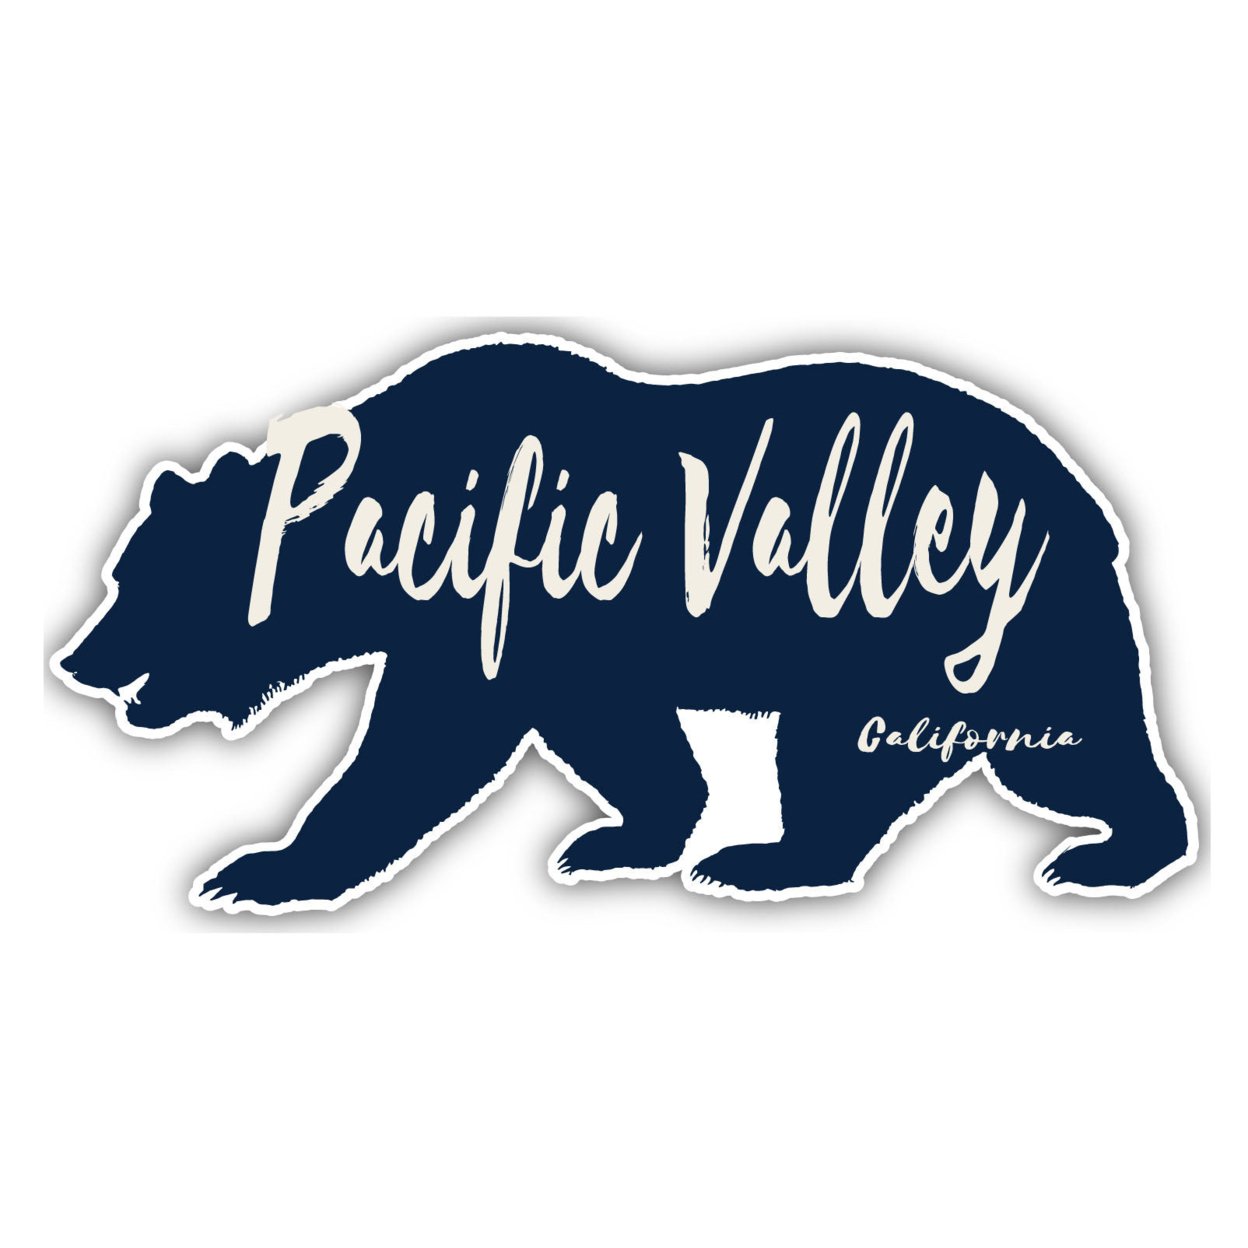 Pacific Valley California Souvenir Decorative Stickers (Choose Theme And Size) - Single Unit, 2-Inch, Bear